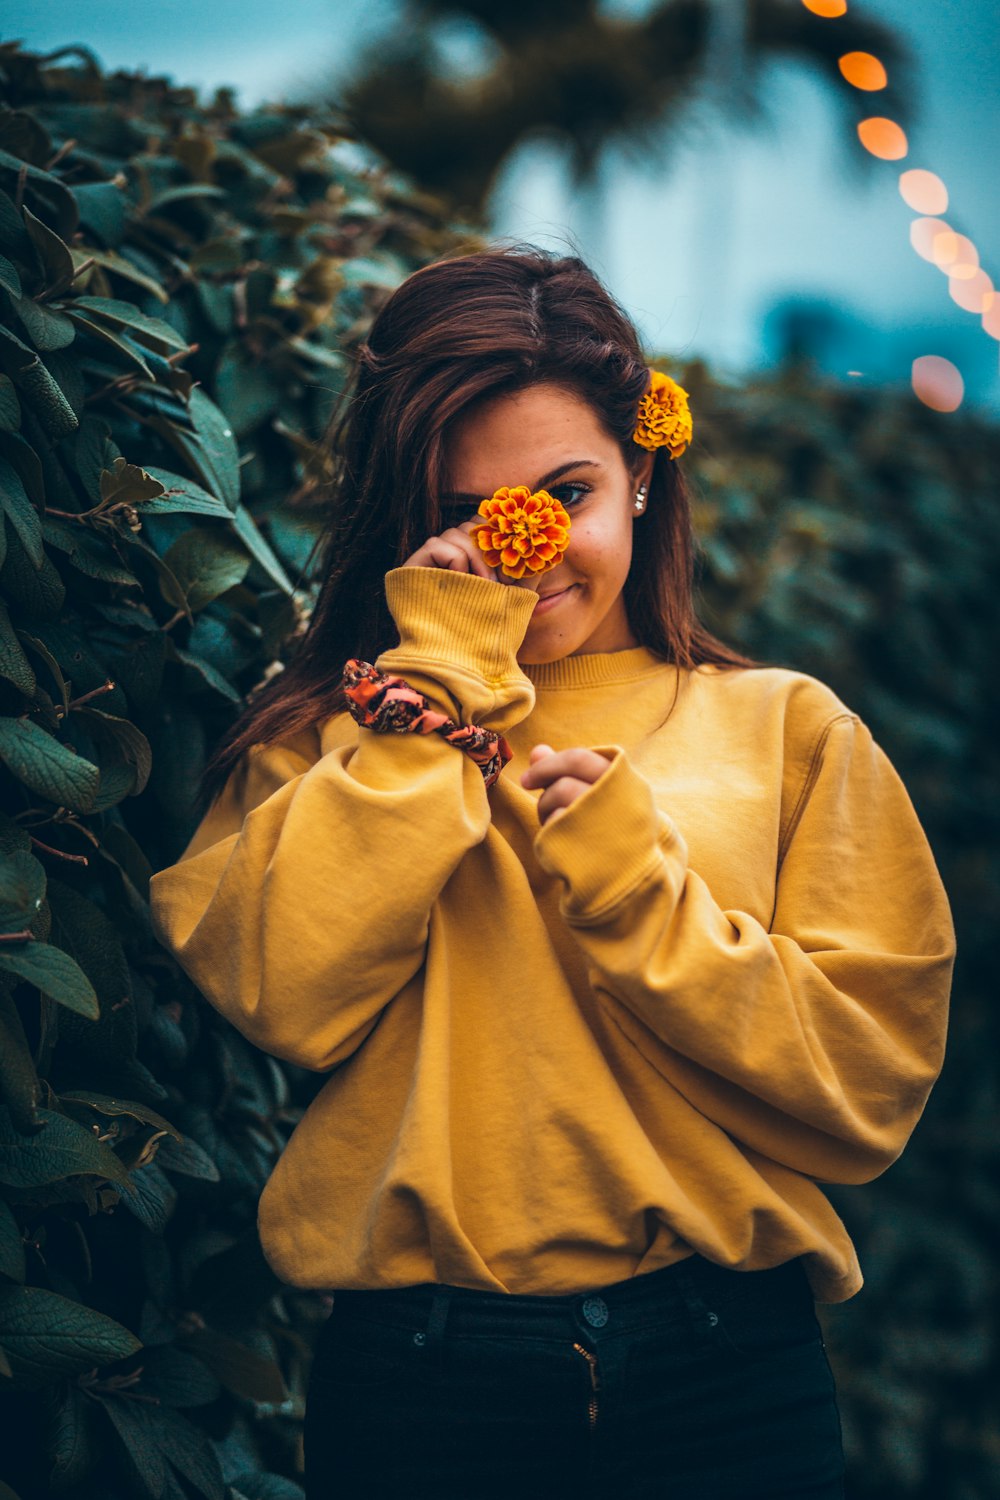 woman holding marigold flower by her face